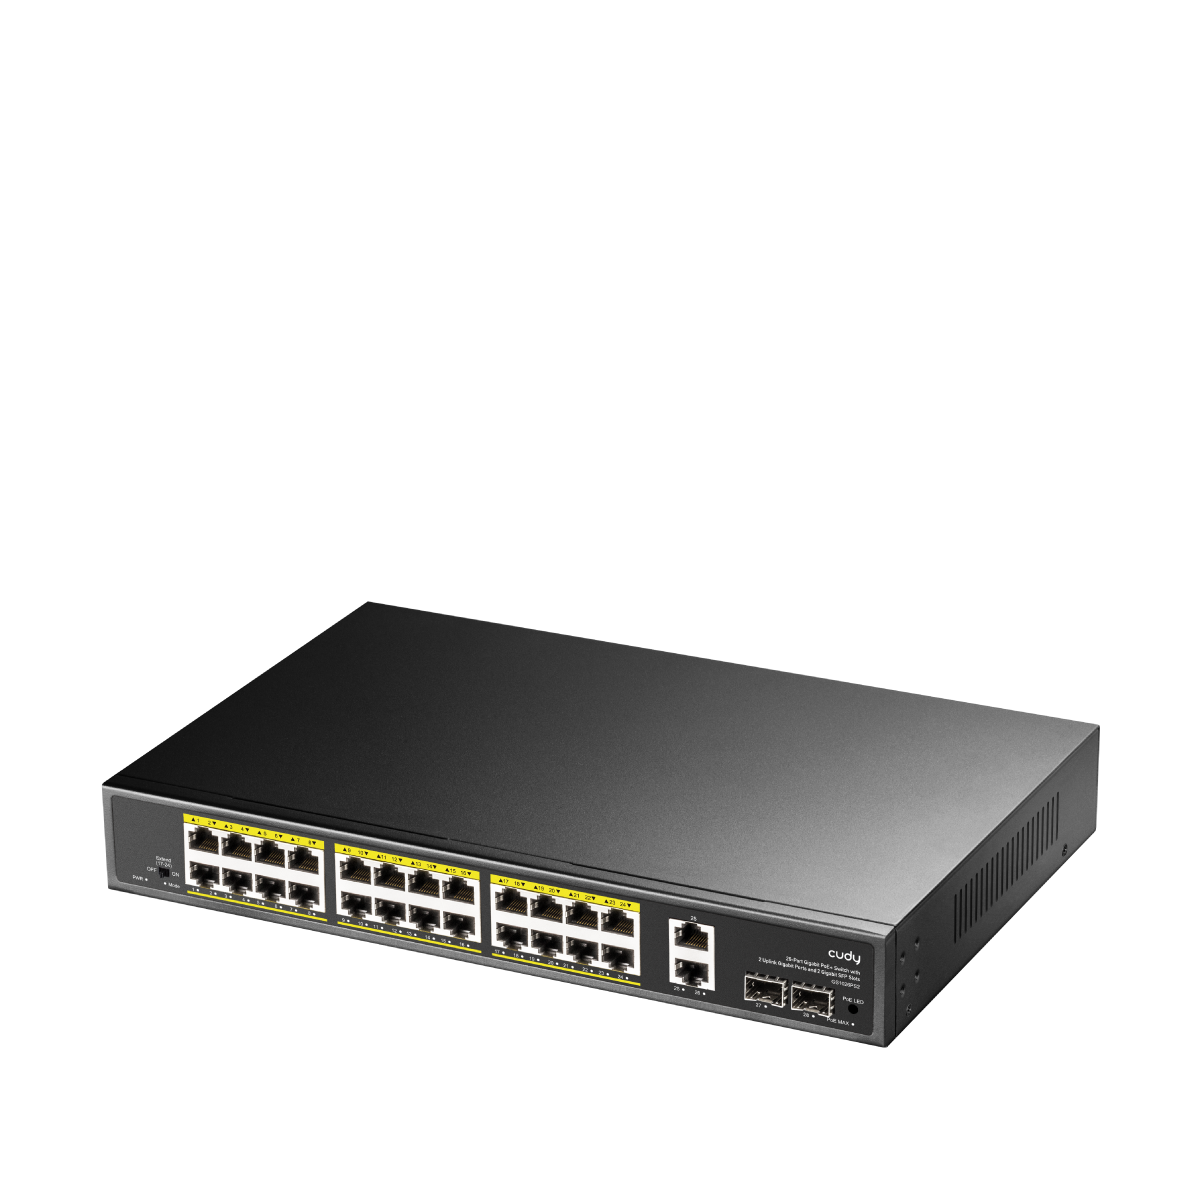 24-GbE PoE Switch with 2 Uplink GbE and 2 Uplink SFP, GS1026PS2 1.0